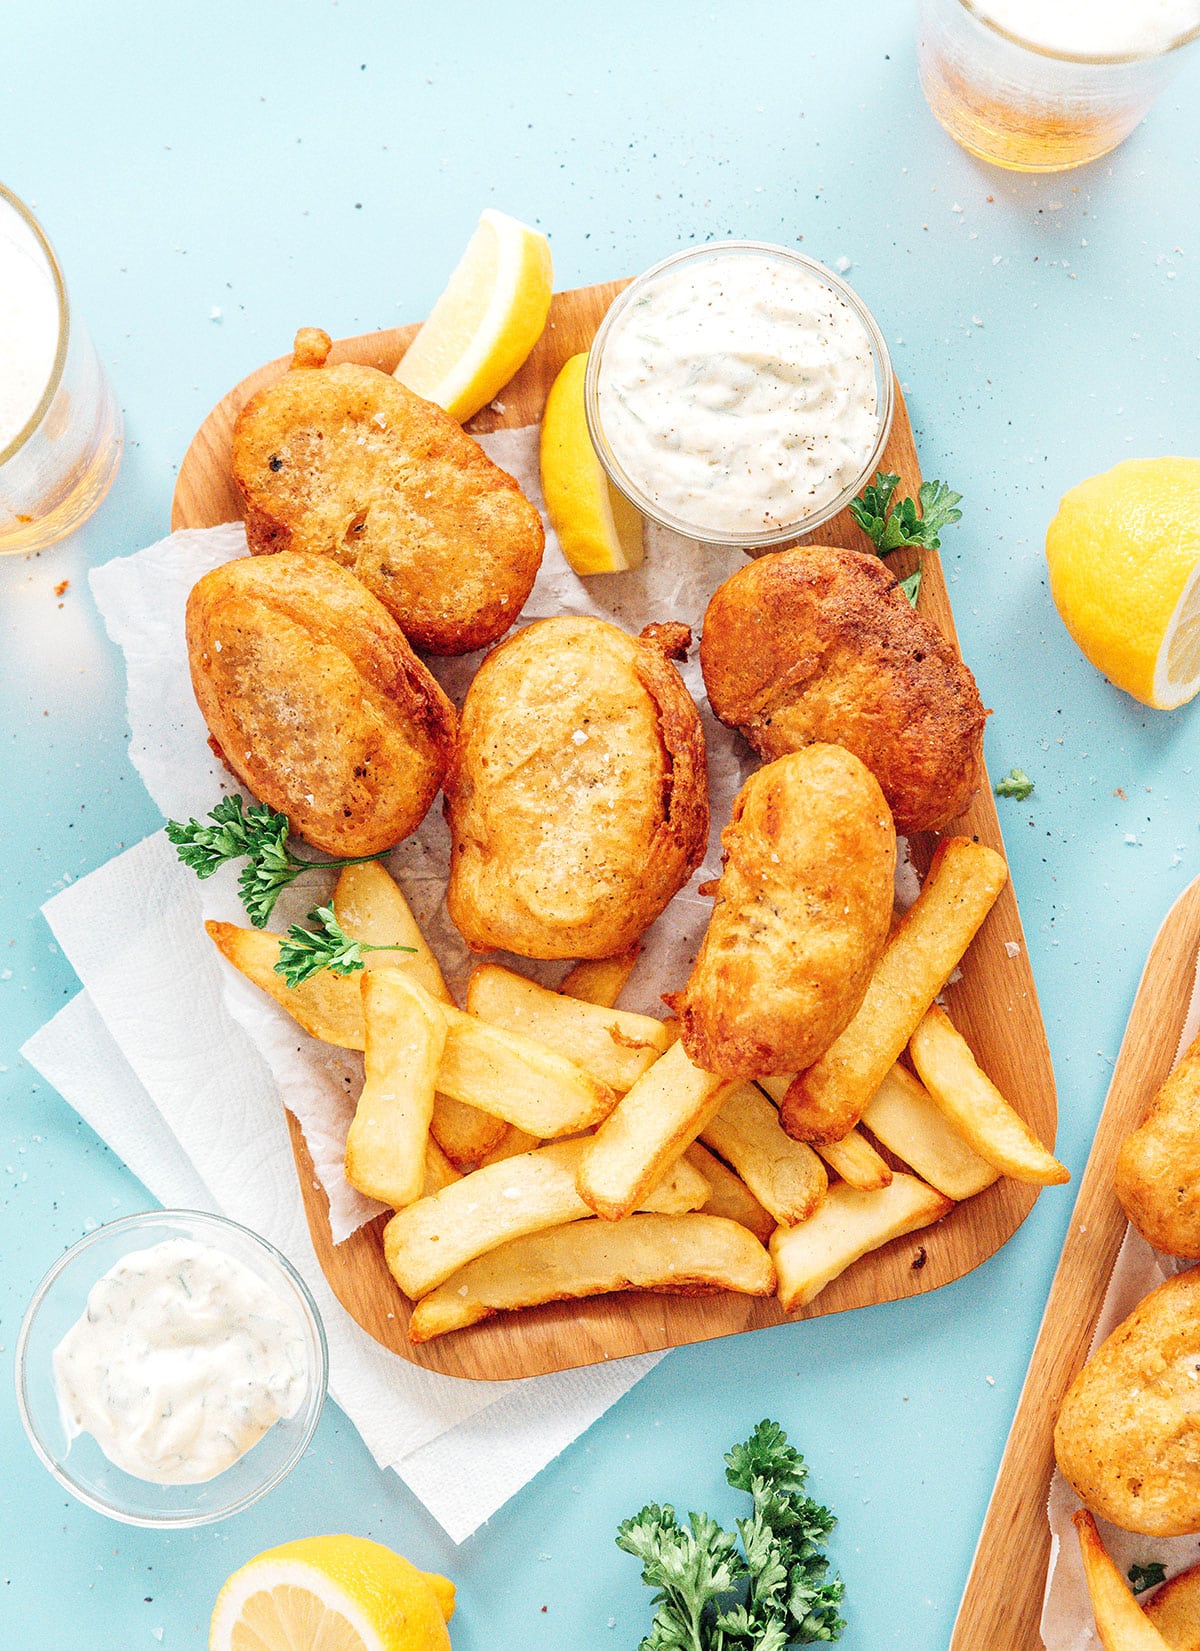 Vegan fish and chips on a wood board with a bowl of tartar sauce.